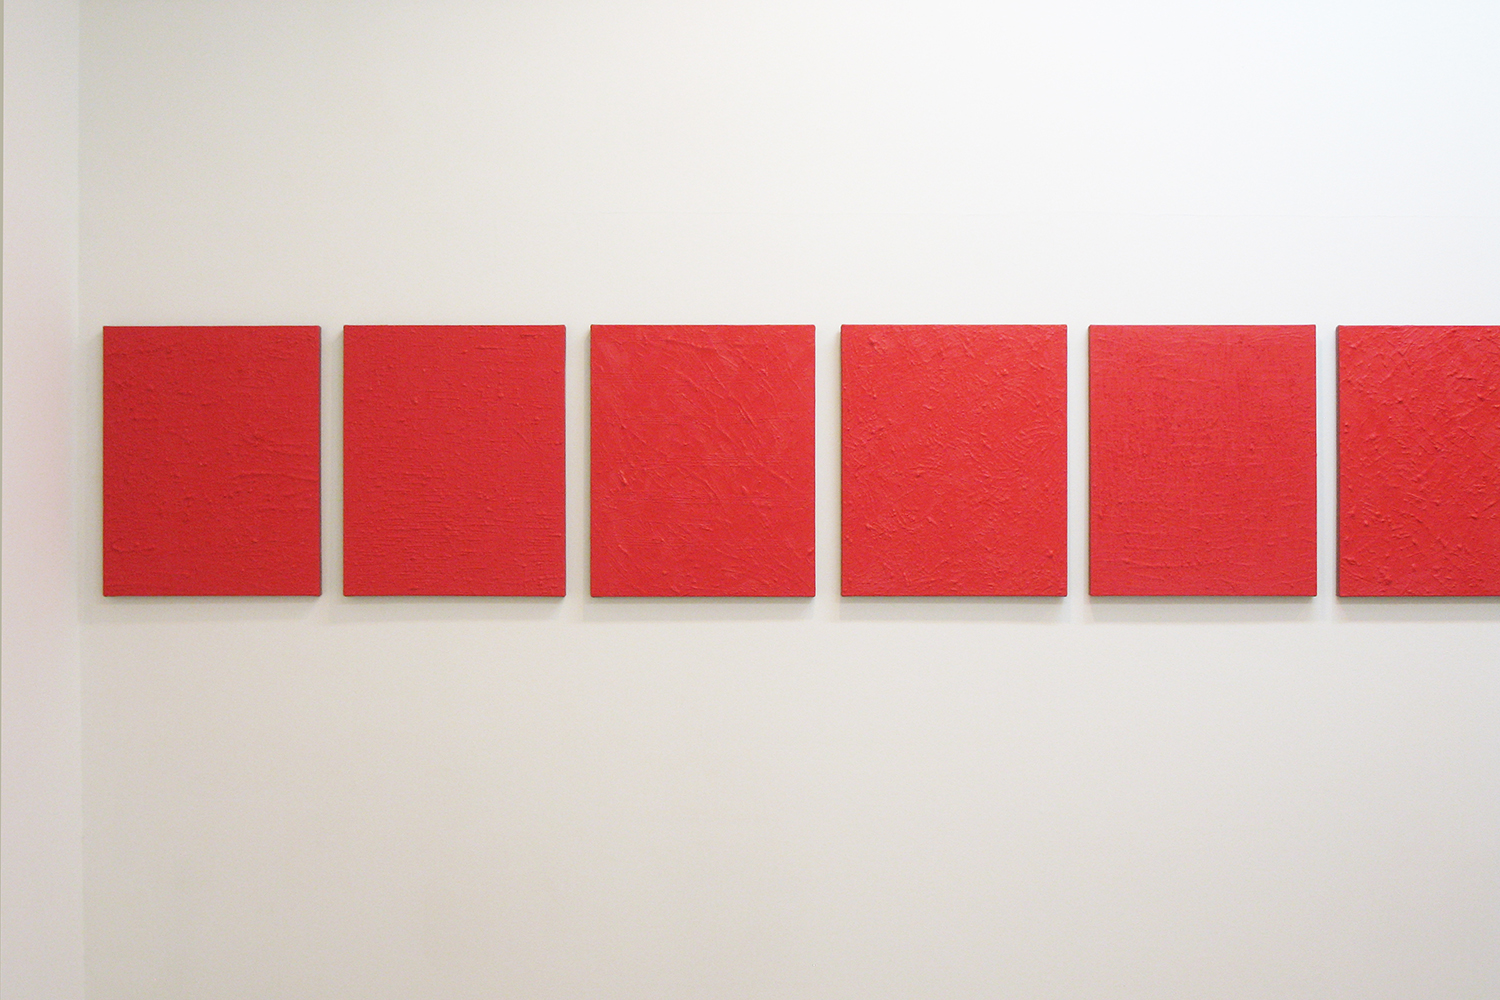 Installation View: Untitled - Beni Red｜Oil on aluminum｜455 x 380 mm｜2012 each